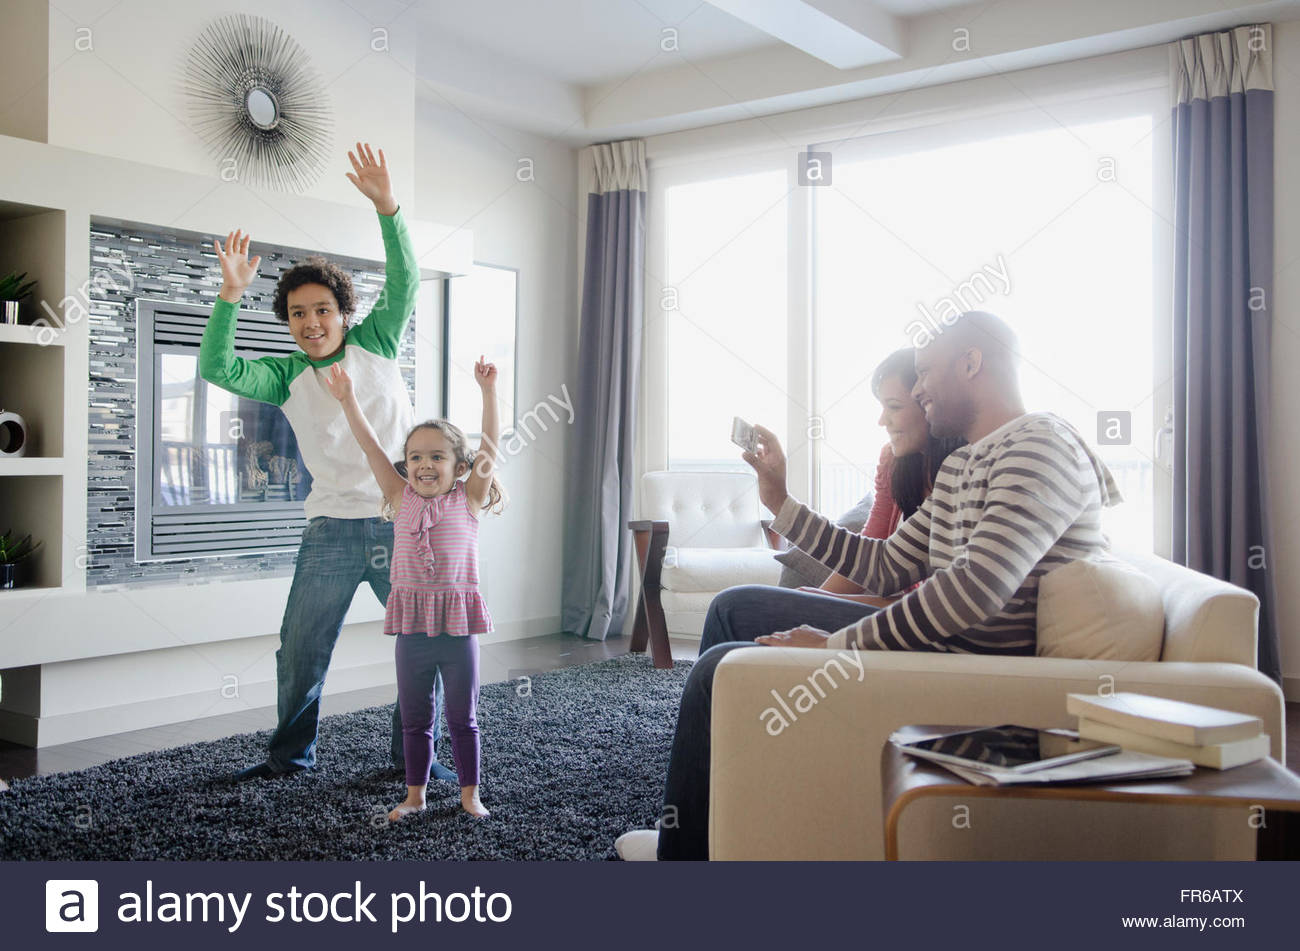 brother and sister playing motion sensing video game Stock Photo